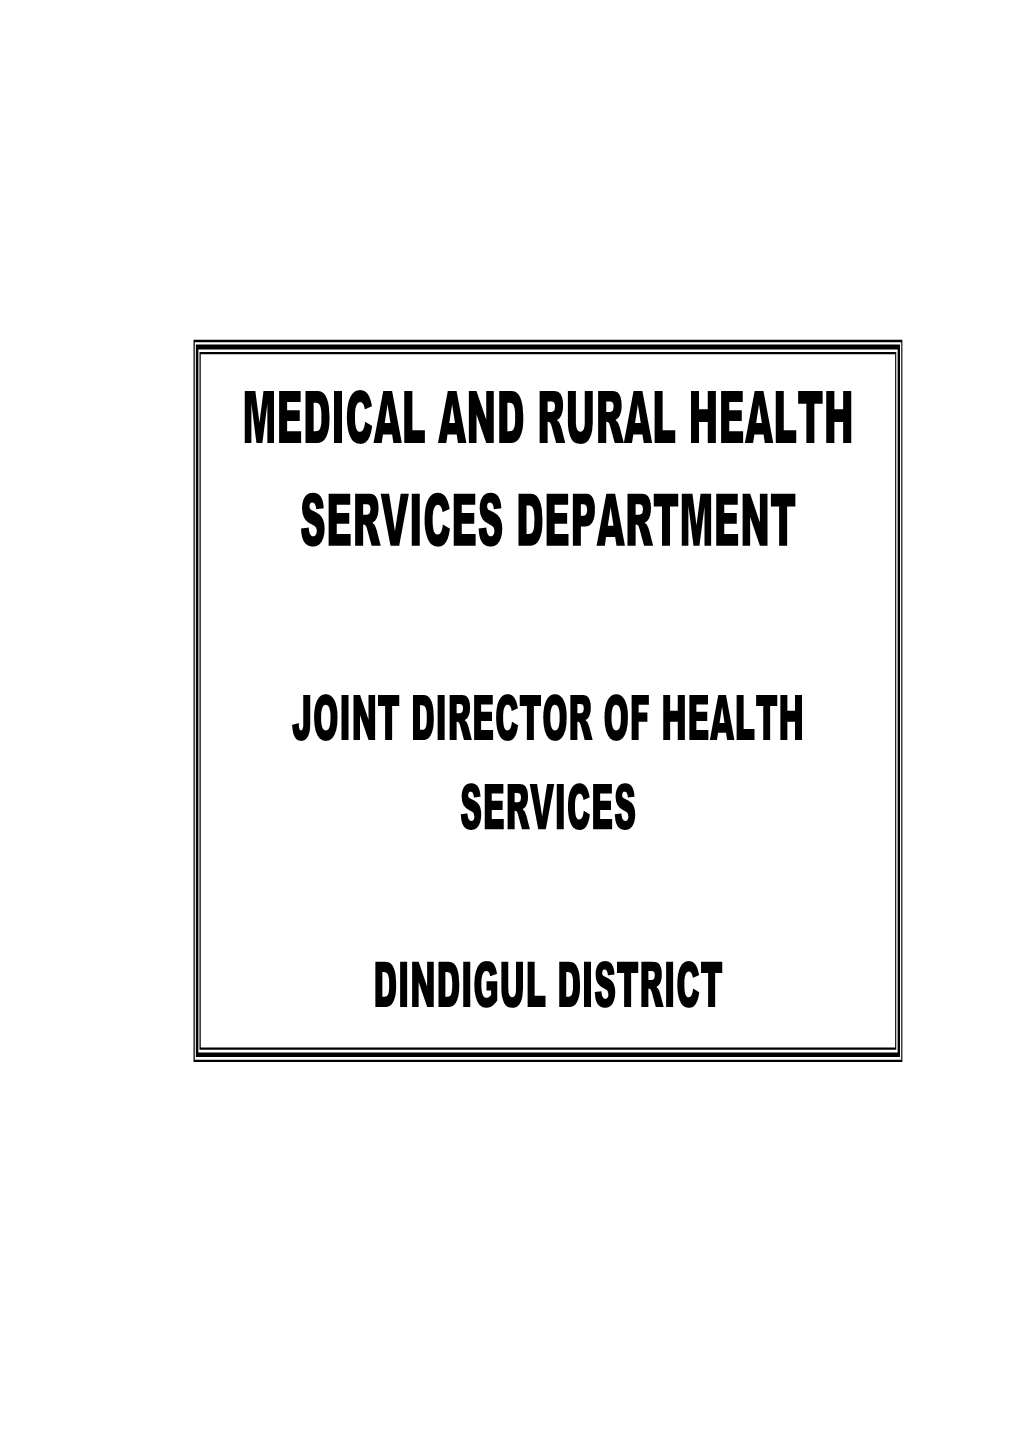 Medical and Rural Health Services Department